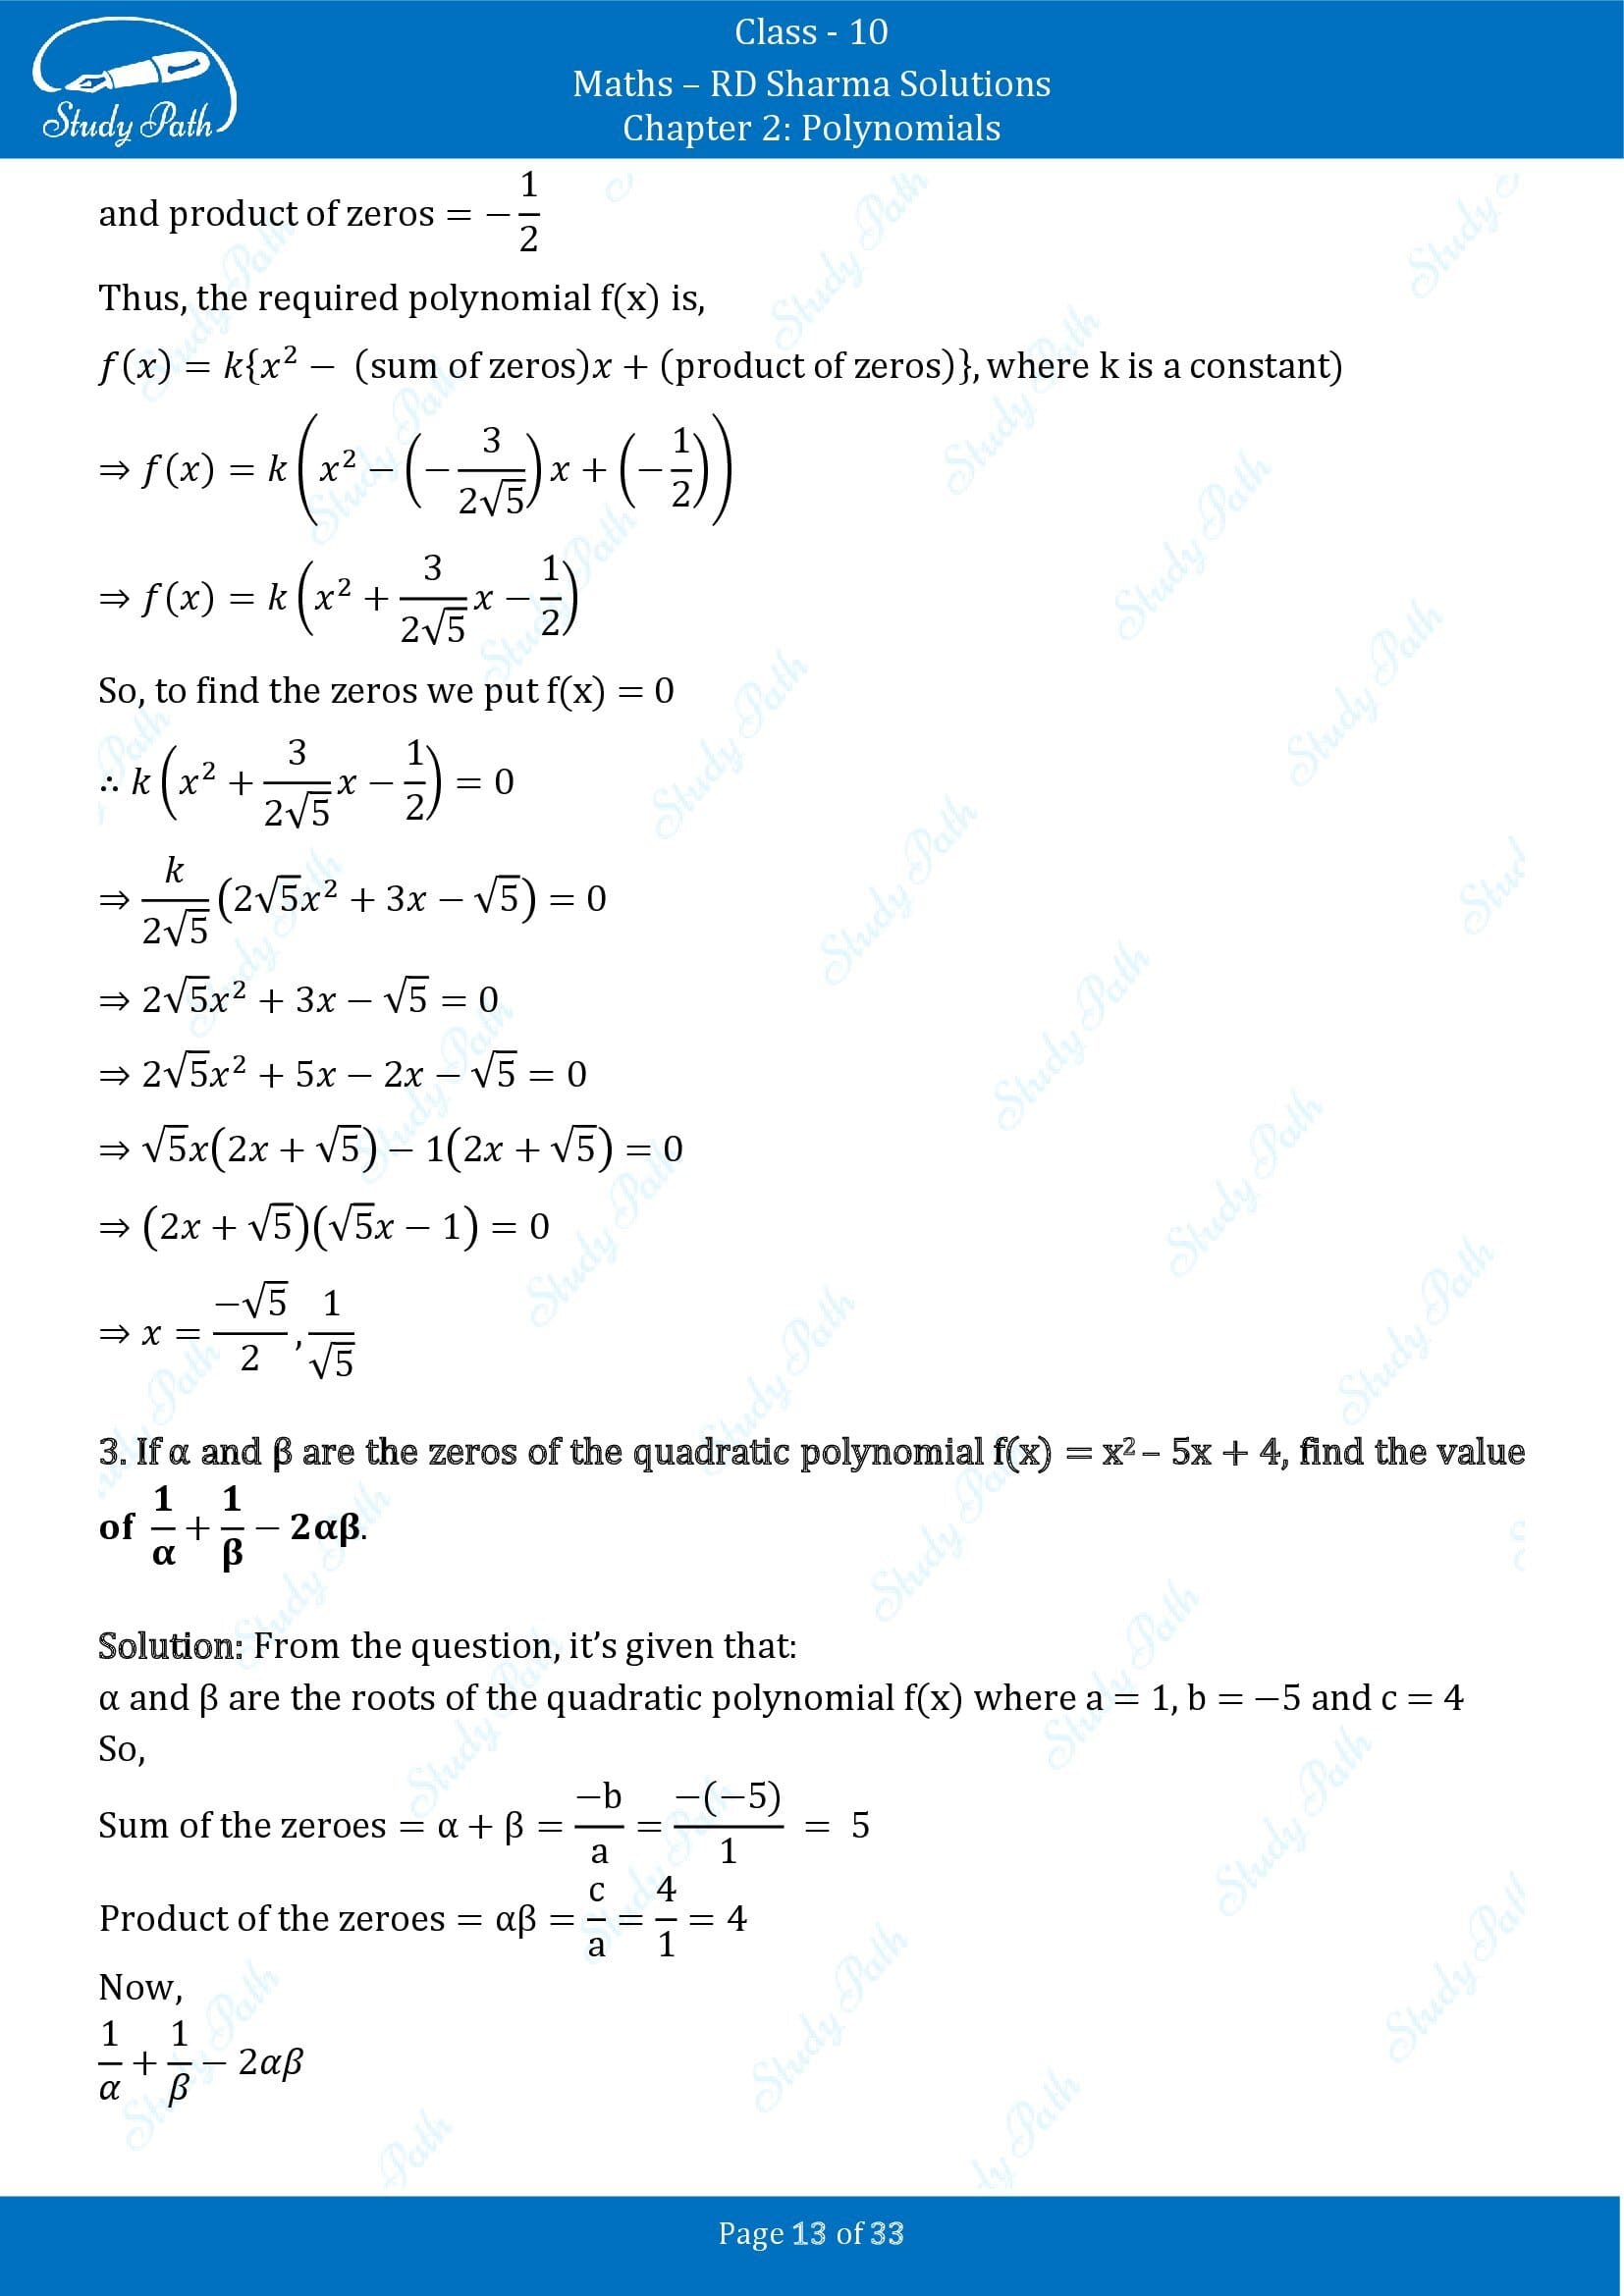 RD Sharma Solutions Class 10 Chapter 2 Polynomials Exercise 2.1 00013